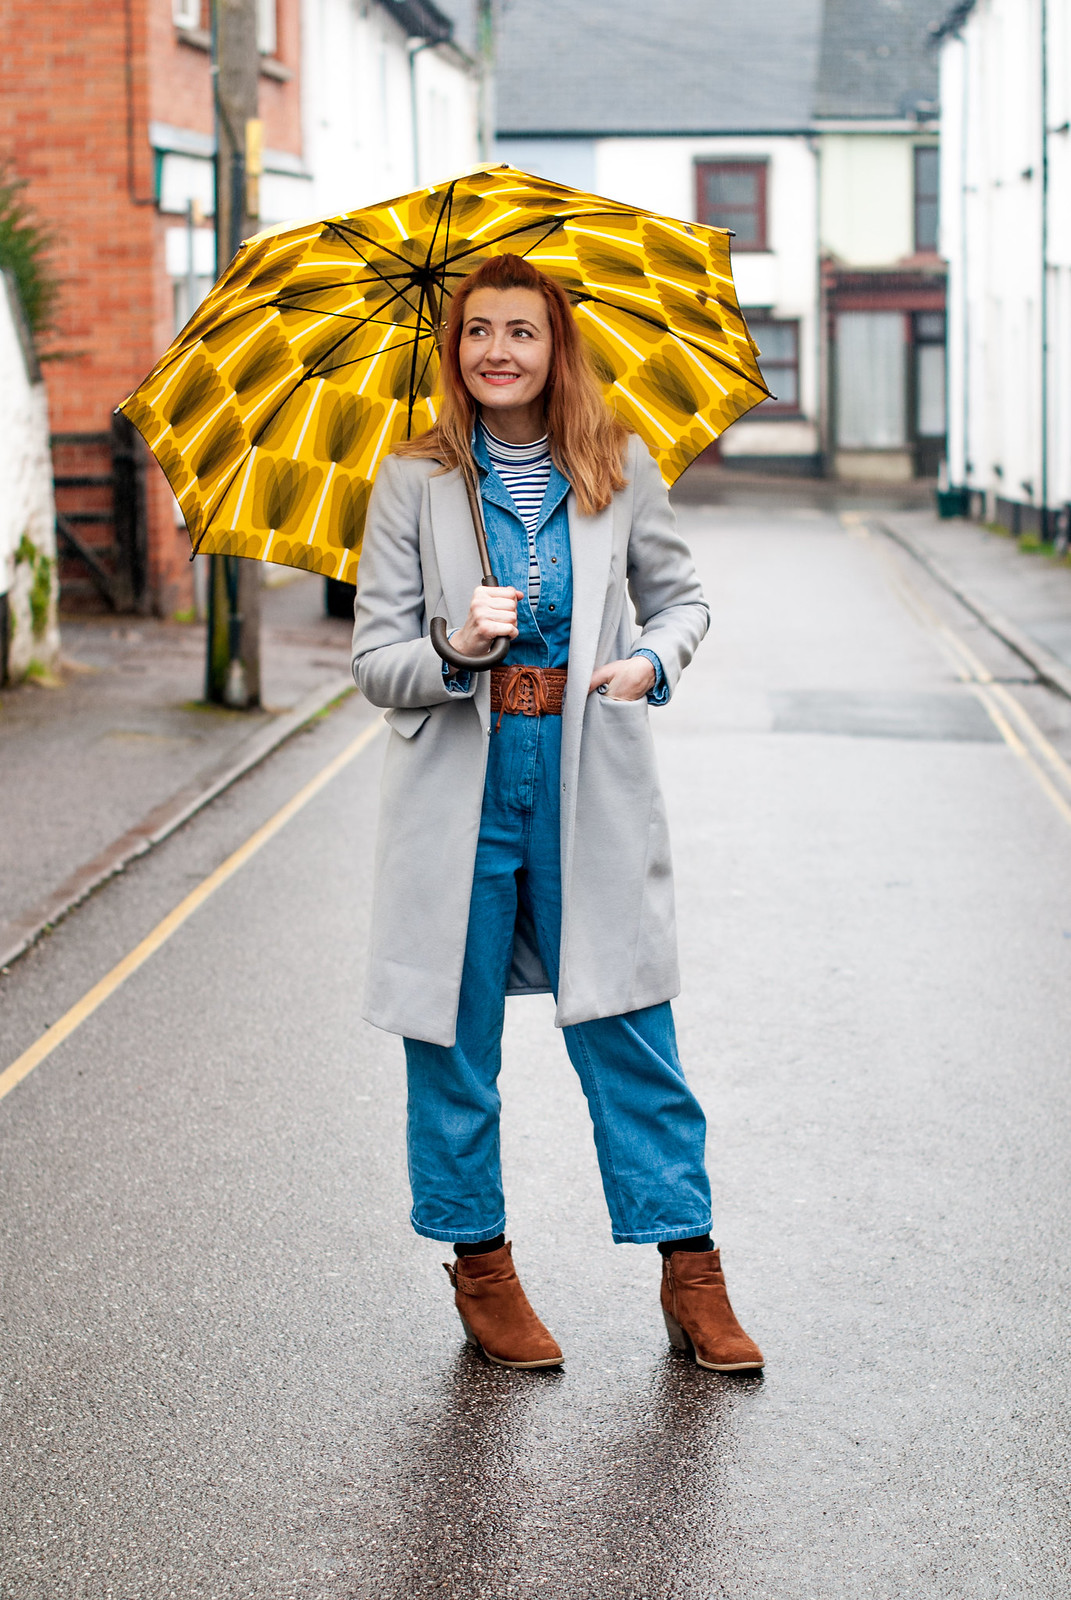 Styling a Boiler Suit for a Rainy Spring Day: Denim boiler suit \ grey duster coat \ striped Breton roll neck \ tan suede ankle boots | Not Dressed As Lamb, over 40 fashion